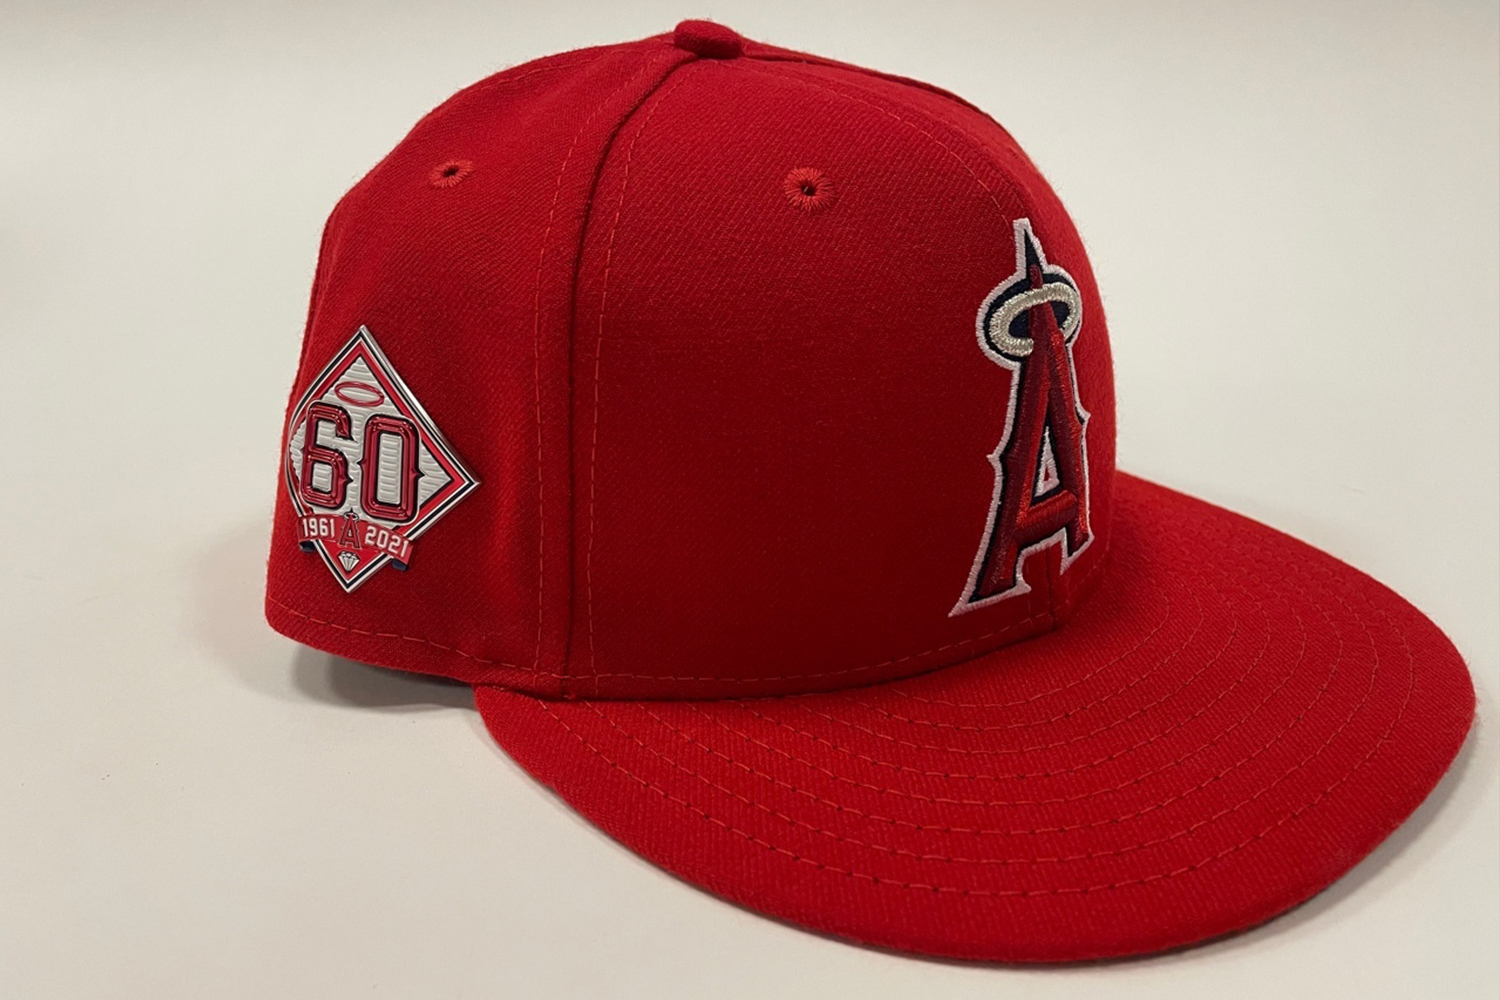 60th anniversary commemorative hat patch